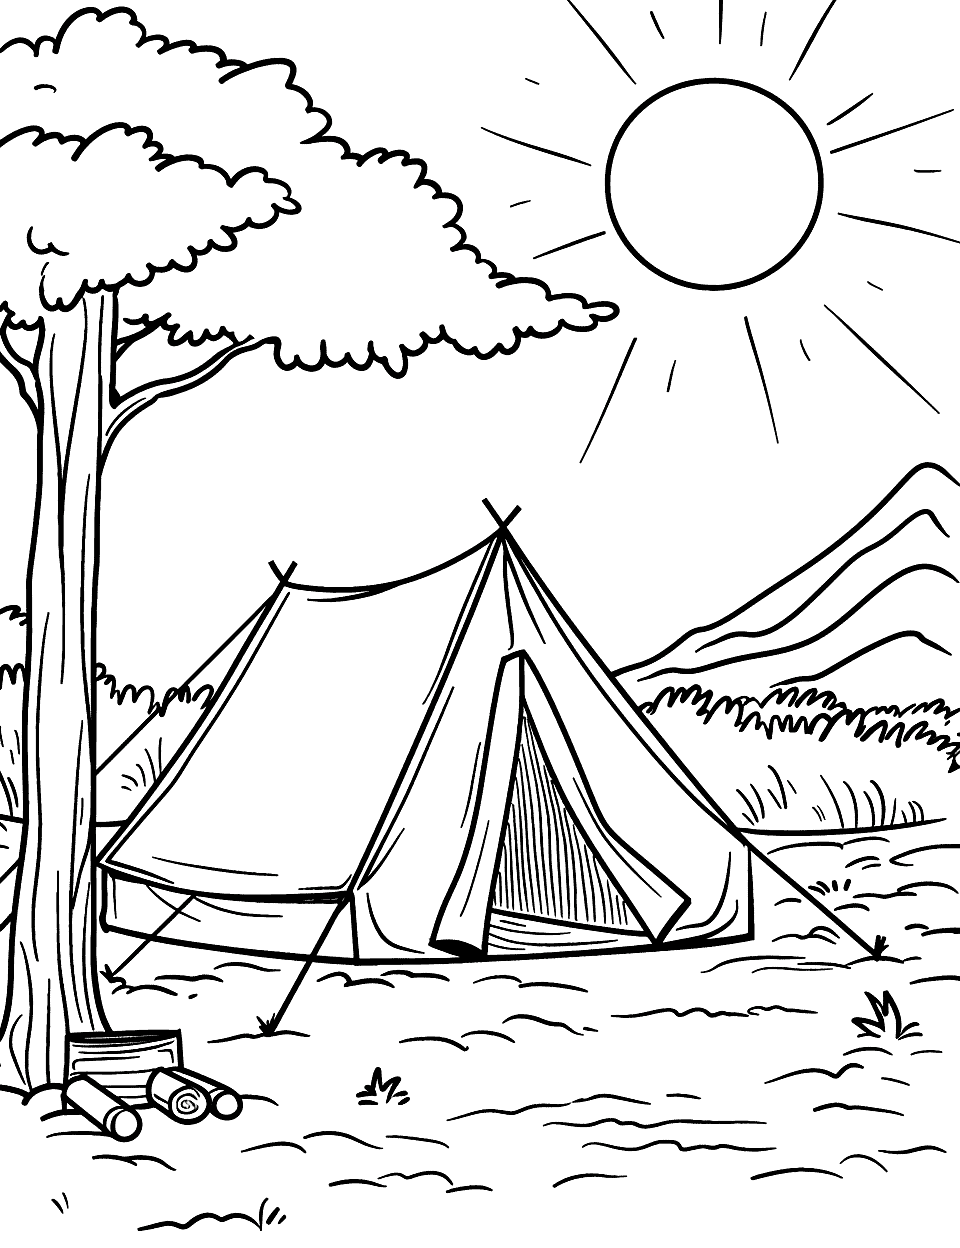 Morning in the Campsite Camping Coloring Page - A tent with a beautiful sunrise in the background.